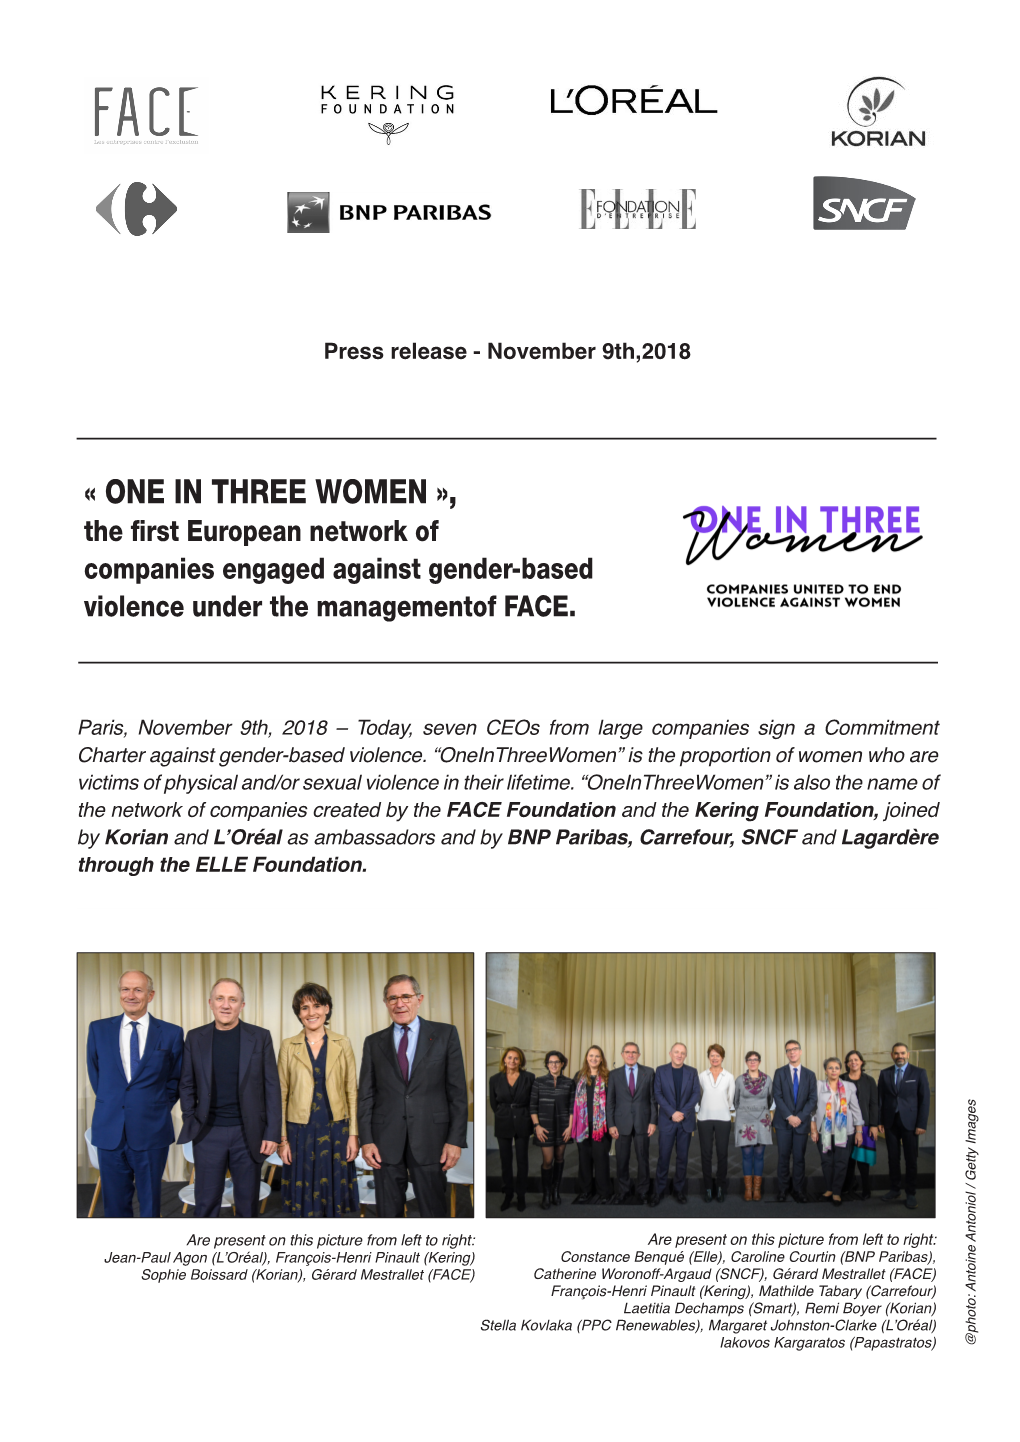 « ONE in THREE WOMEN », the First European Network of Companies Engaged Against Gender-Based Violence Under the Managementof FACE